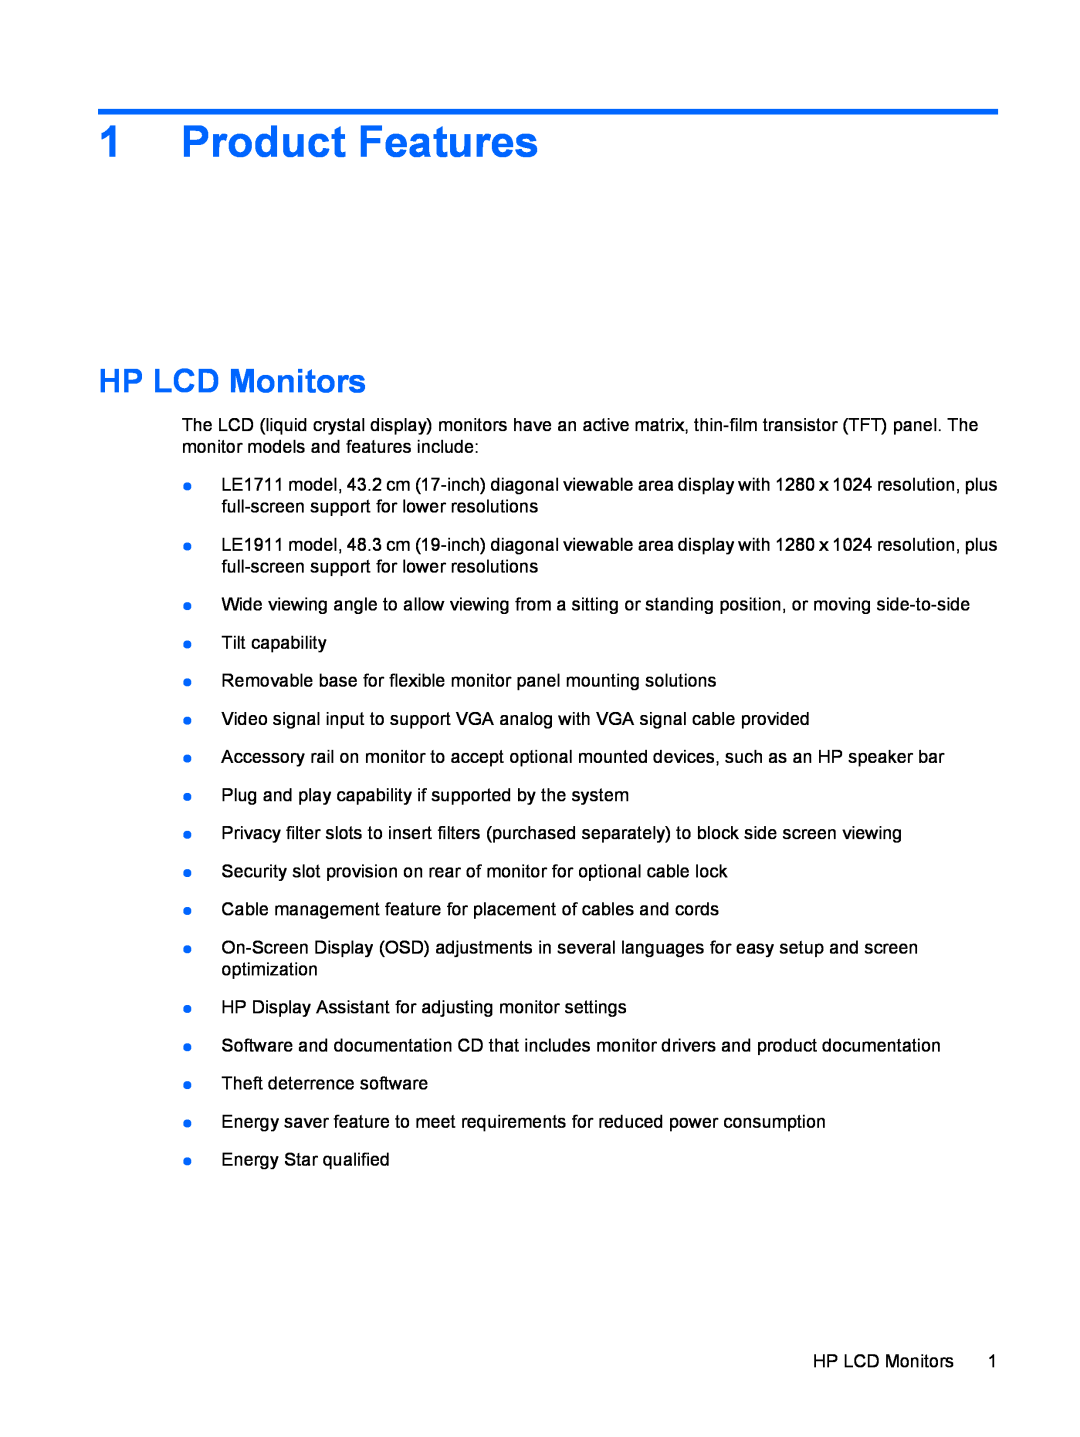 HP LE1711 17-inch manual Product Features, HP LCD Monitors 